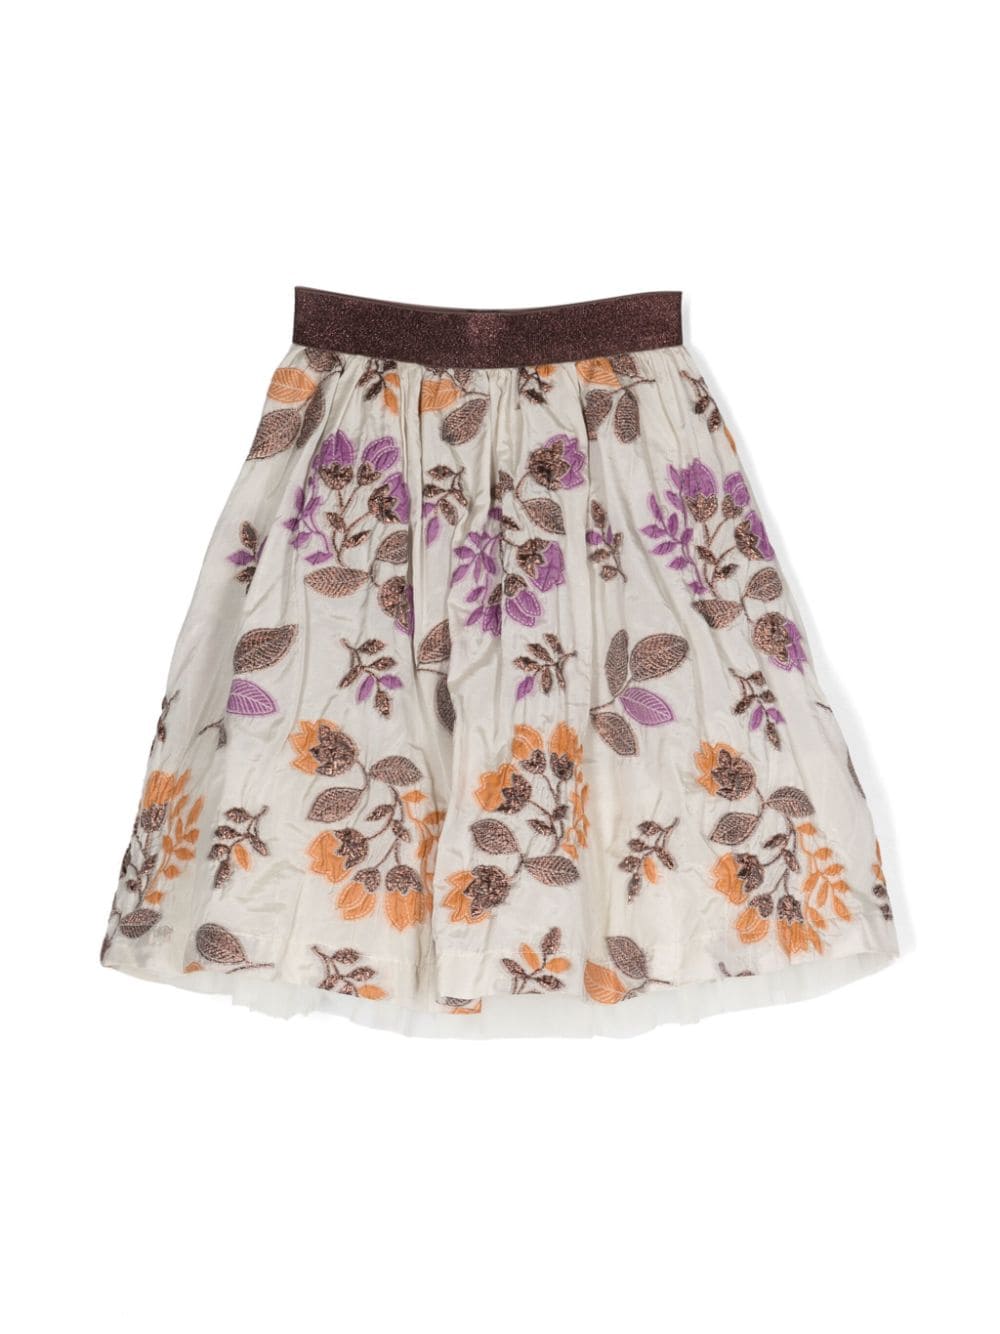 Caffe' D'orzo floral-embroidered pleated skirt - Neutrals von Caffe' D'orzo